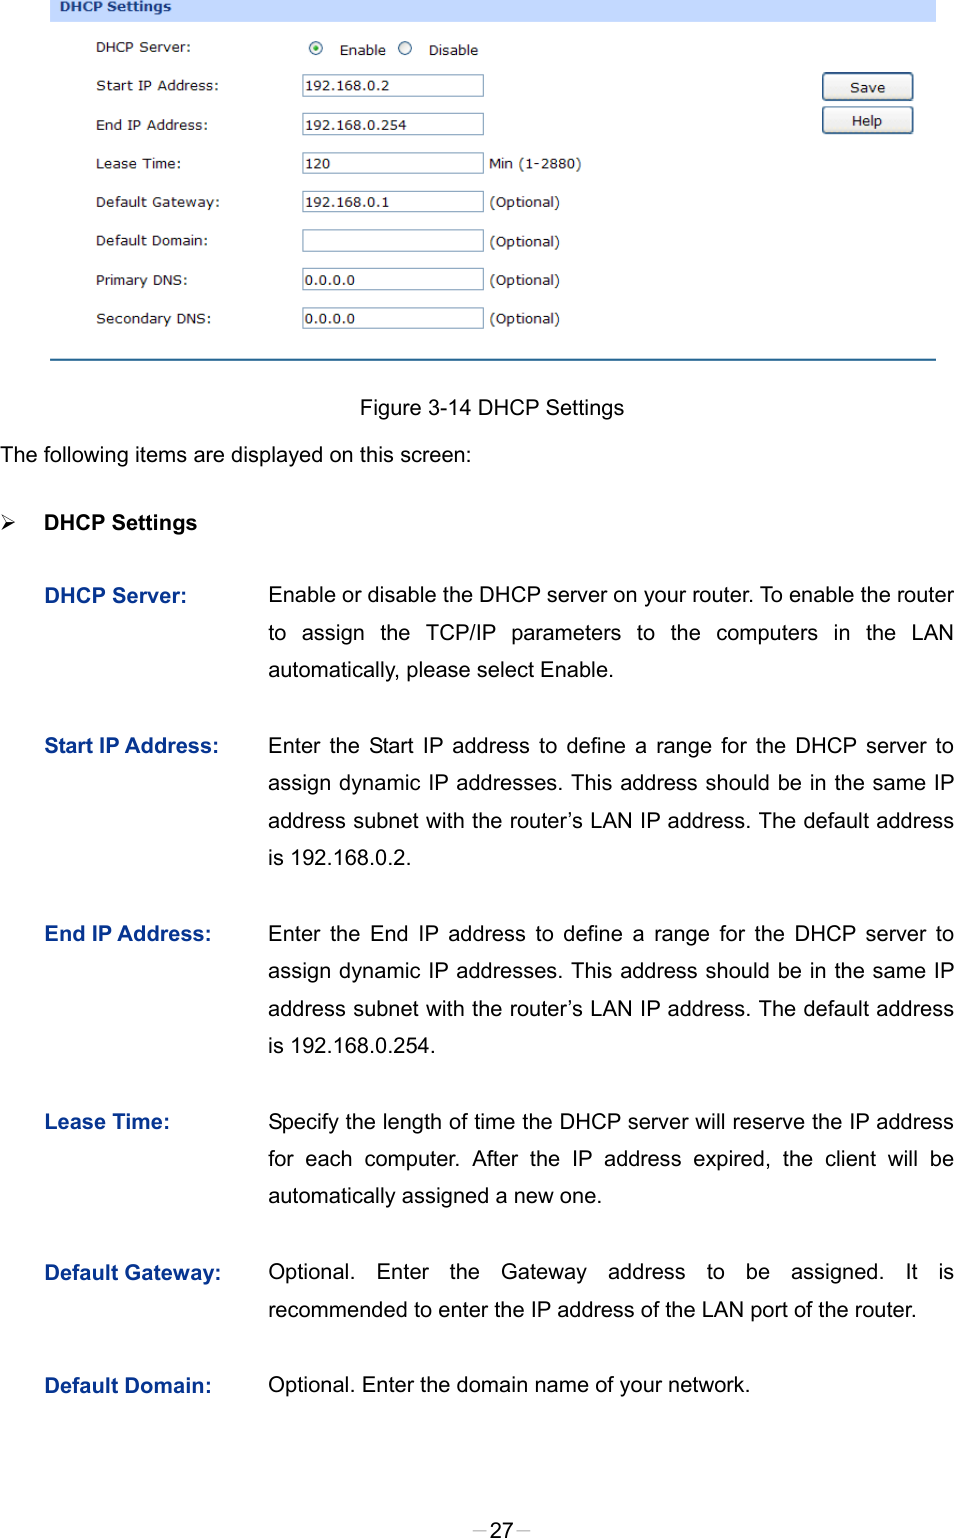   Figure 3-14 DHCP Settings   The following items are displayed on this screen:  DHCP Settings   DHCP Server:  Enable or disable the DHCP server on your router. To enable the router to assign the TCP/IP parameters to the computers in the LAN automatically, please select Enable.   Start IP Address:  Enter the Start IP address to define a range for the DHCP server to assign dynamic IP addresses. This address should be in the same IP address subnet with the router’s LAN IP address. The default address is 192.168.0.2. End IP Address:  Enter the End IP address to define a range for the DHCP server to assign dynamic IP addresses. This address should be in the same IP address subnet with the router’s LAN IP address. The default address is 192.168.0.254. Lease Time:  Specify the length of time the DHCP server will reserve the IP address for each computer. After the IP address expired, the client will be automatically assigned a new one. Default Gateway:  Optional. Enter the Gateway address to be assigned. It is recommended to enter the IP address of the LAN port of the router. Default Domain:  Optional. Enter the domain name of your network. -27- 